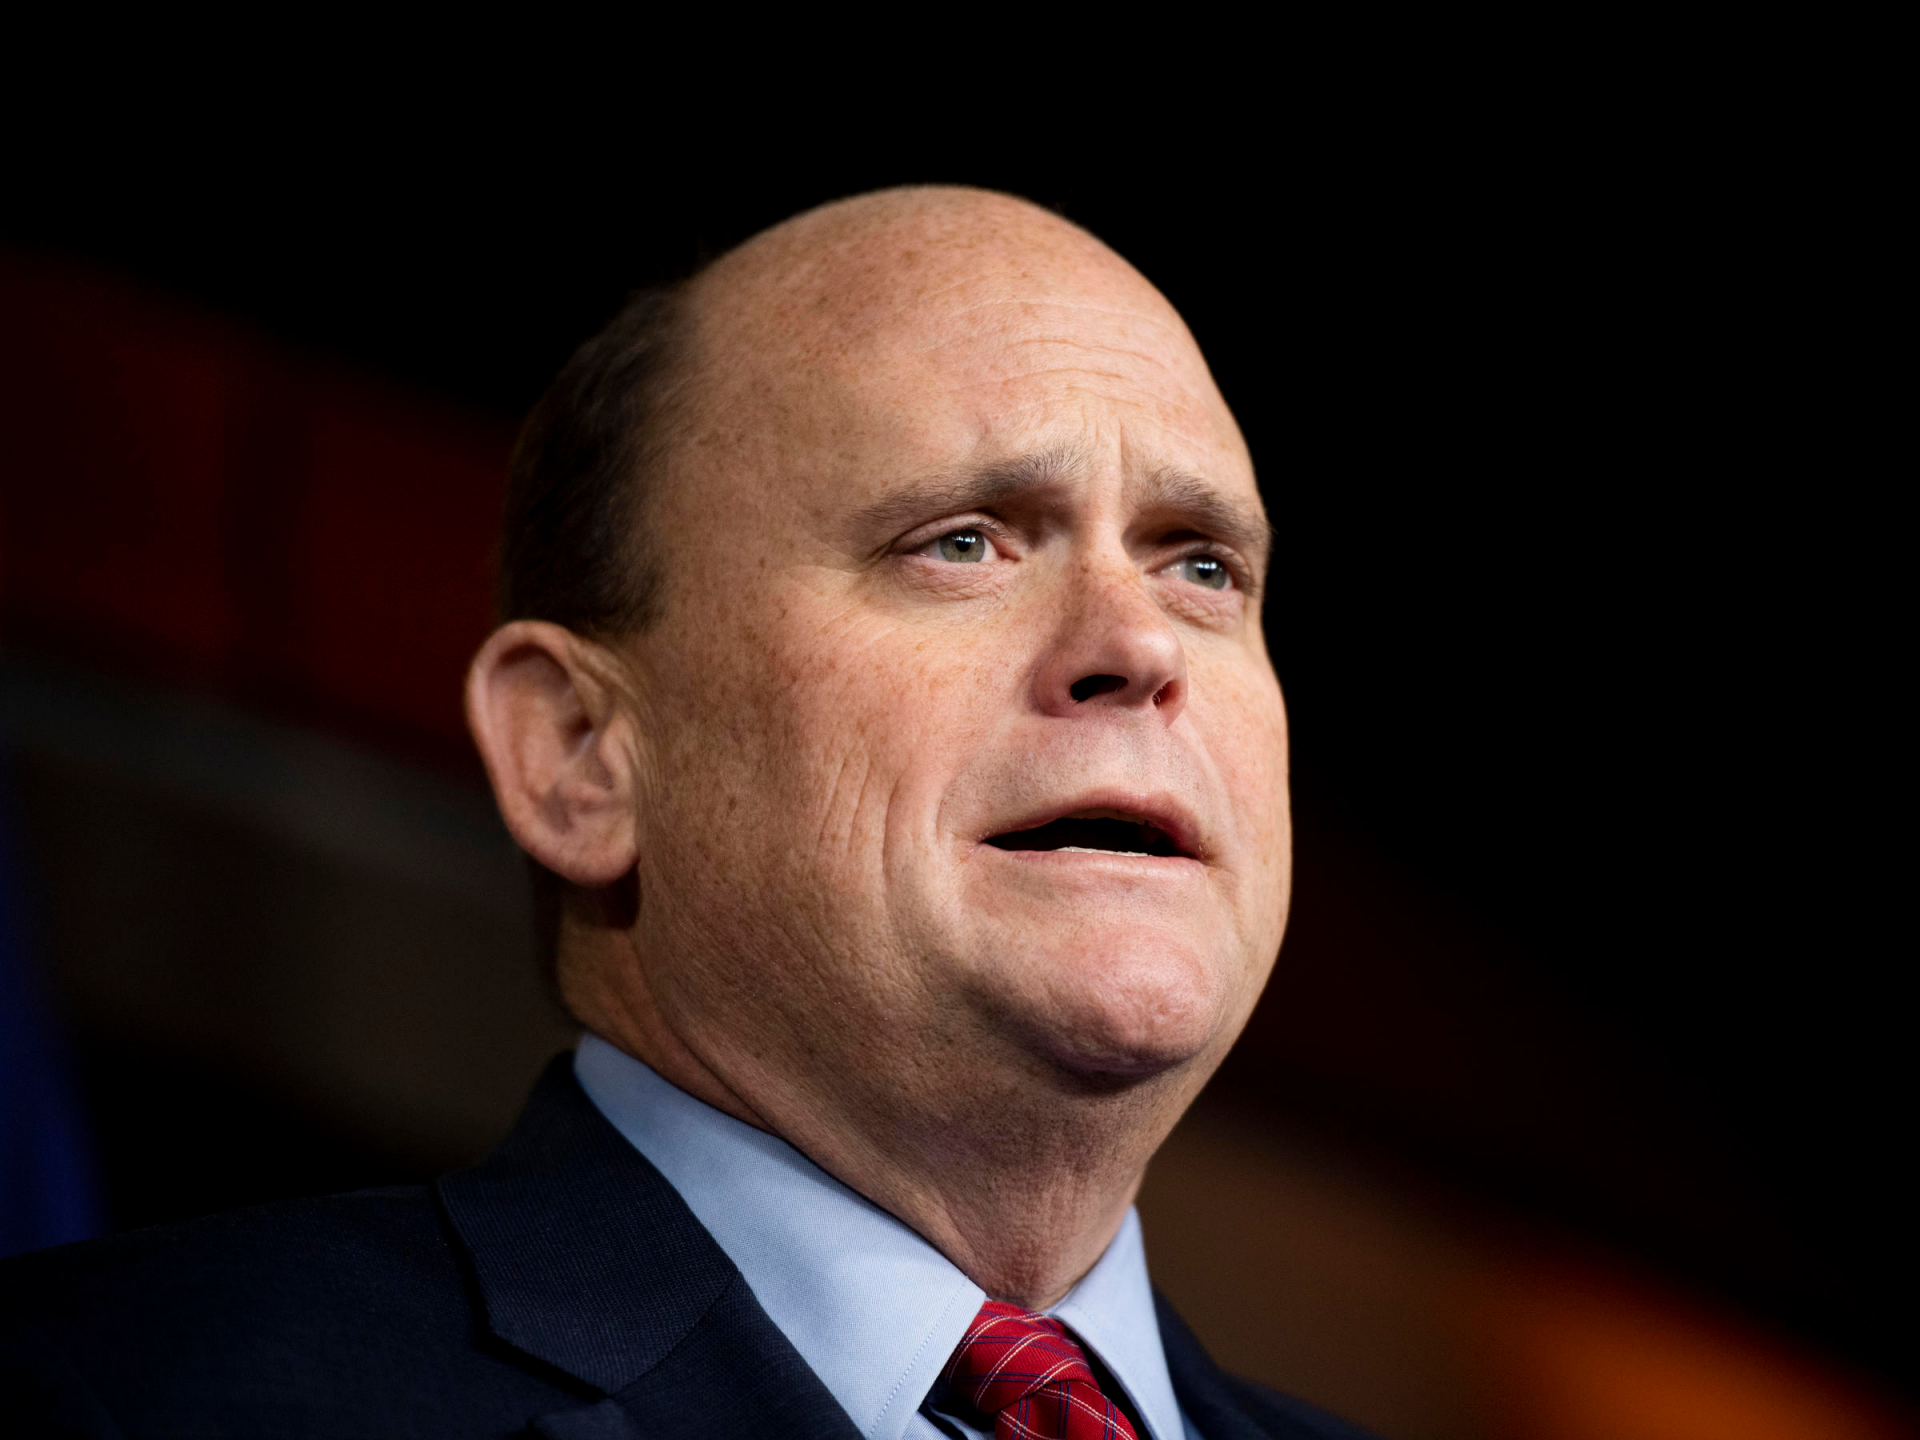 U.S. Rep. Tom Reed, R-N.Y., has announced he would not run for public office again following sexual misconduct allegations. BILL CLARK / CQ ROLL CALL VIA GETTY IMAGES